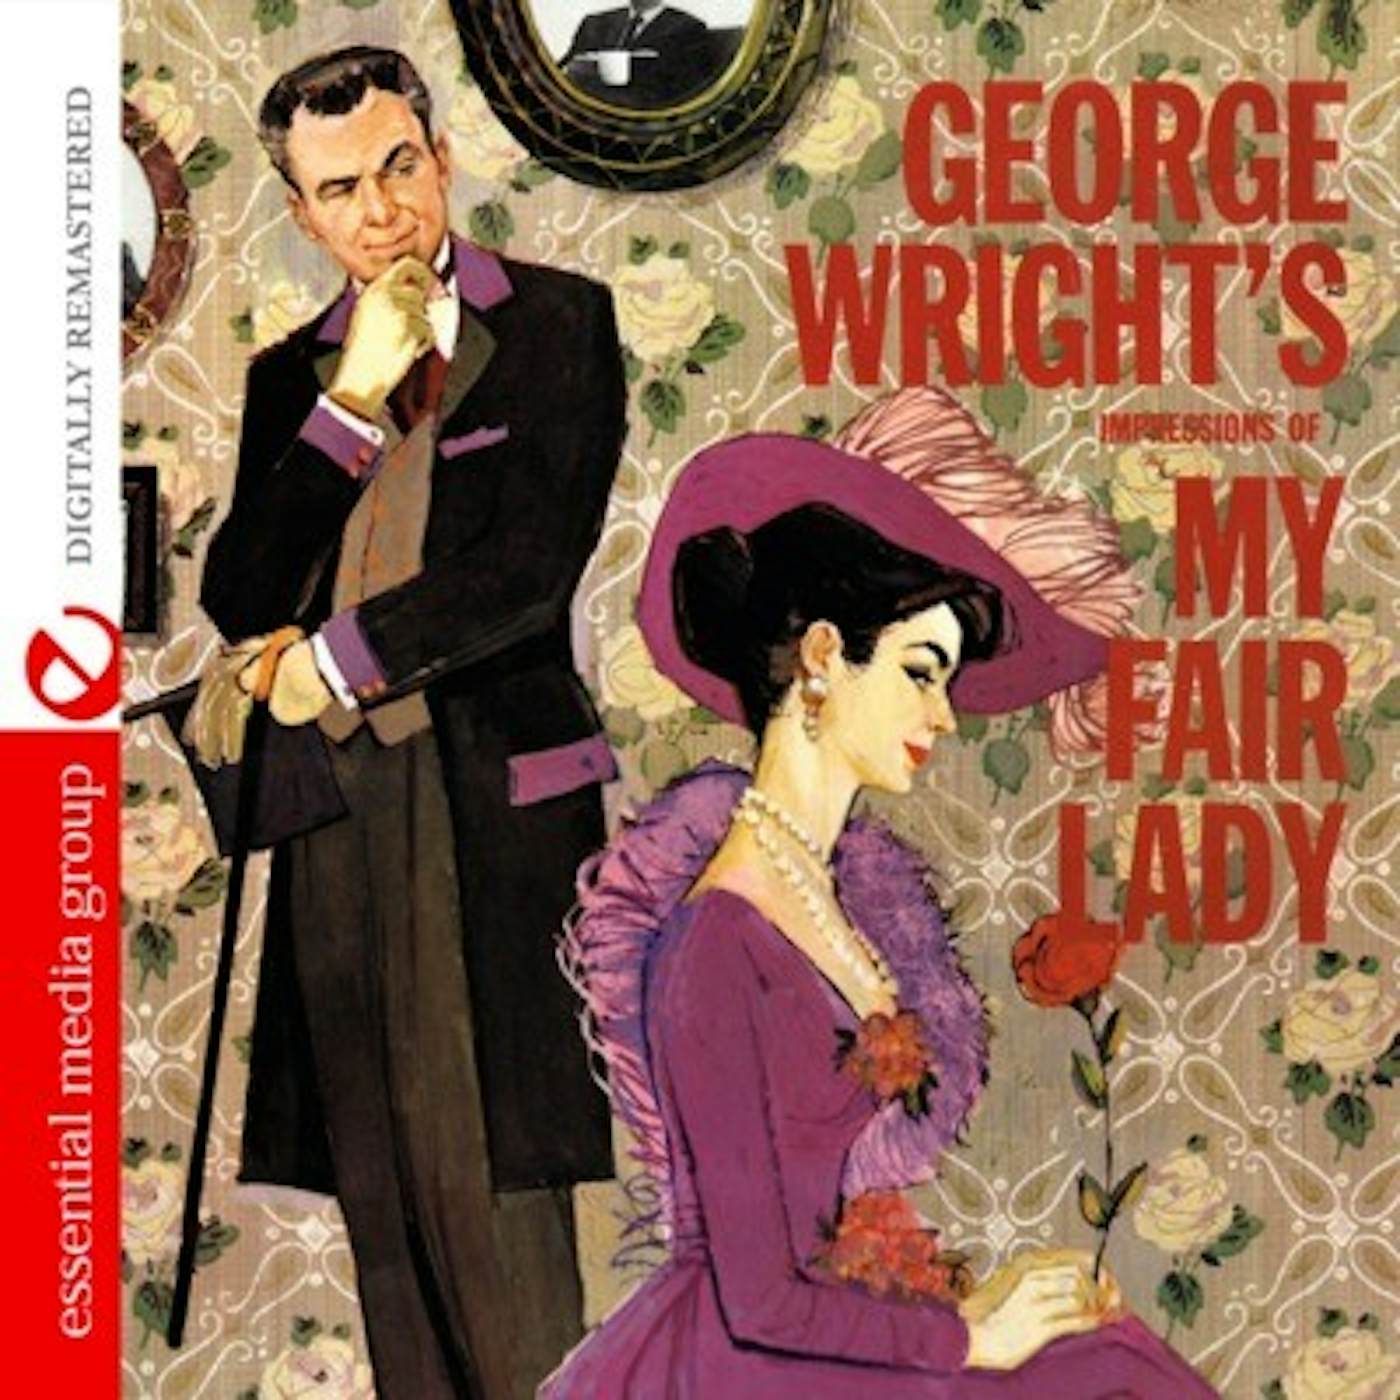 GEORGE WRIGHT'S IMPRESSIONS OF MY FAIR LADY CD